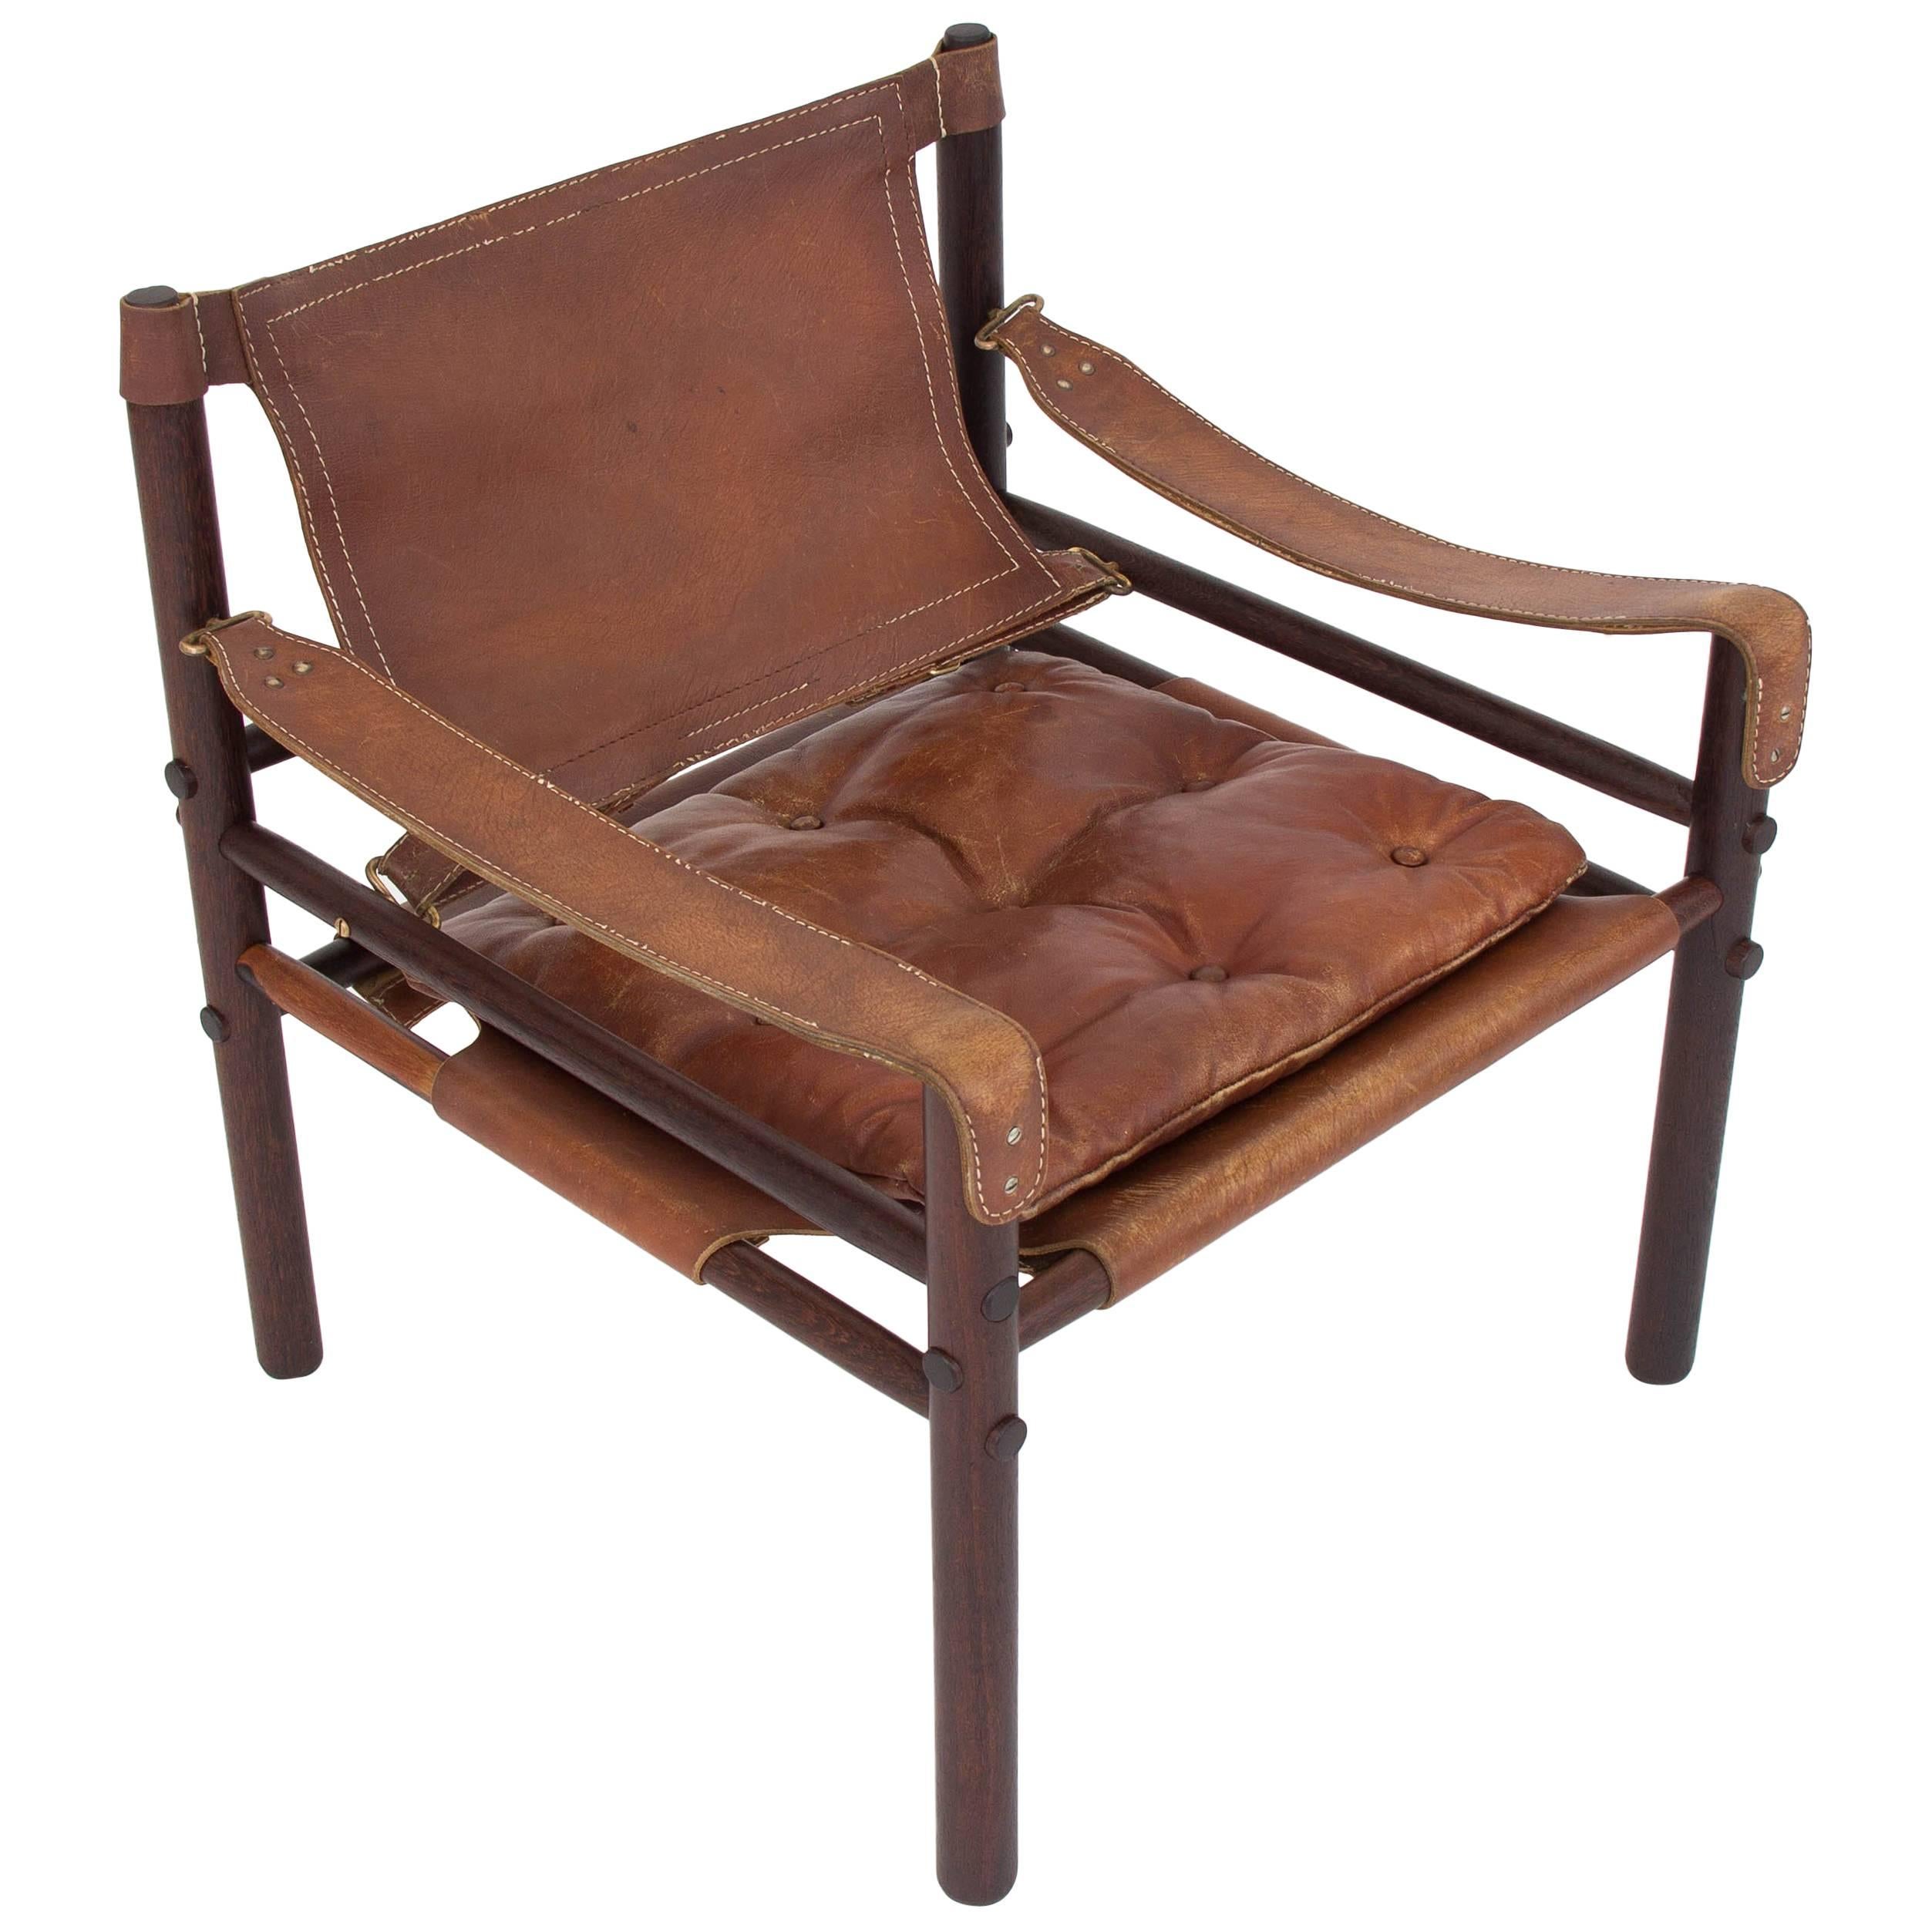 Arne Norell "Sirocco" Safari Sling Chair in Brown Leather